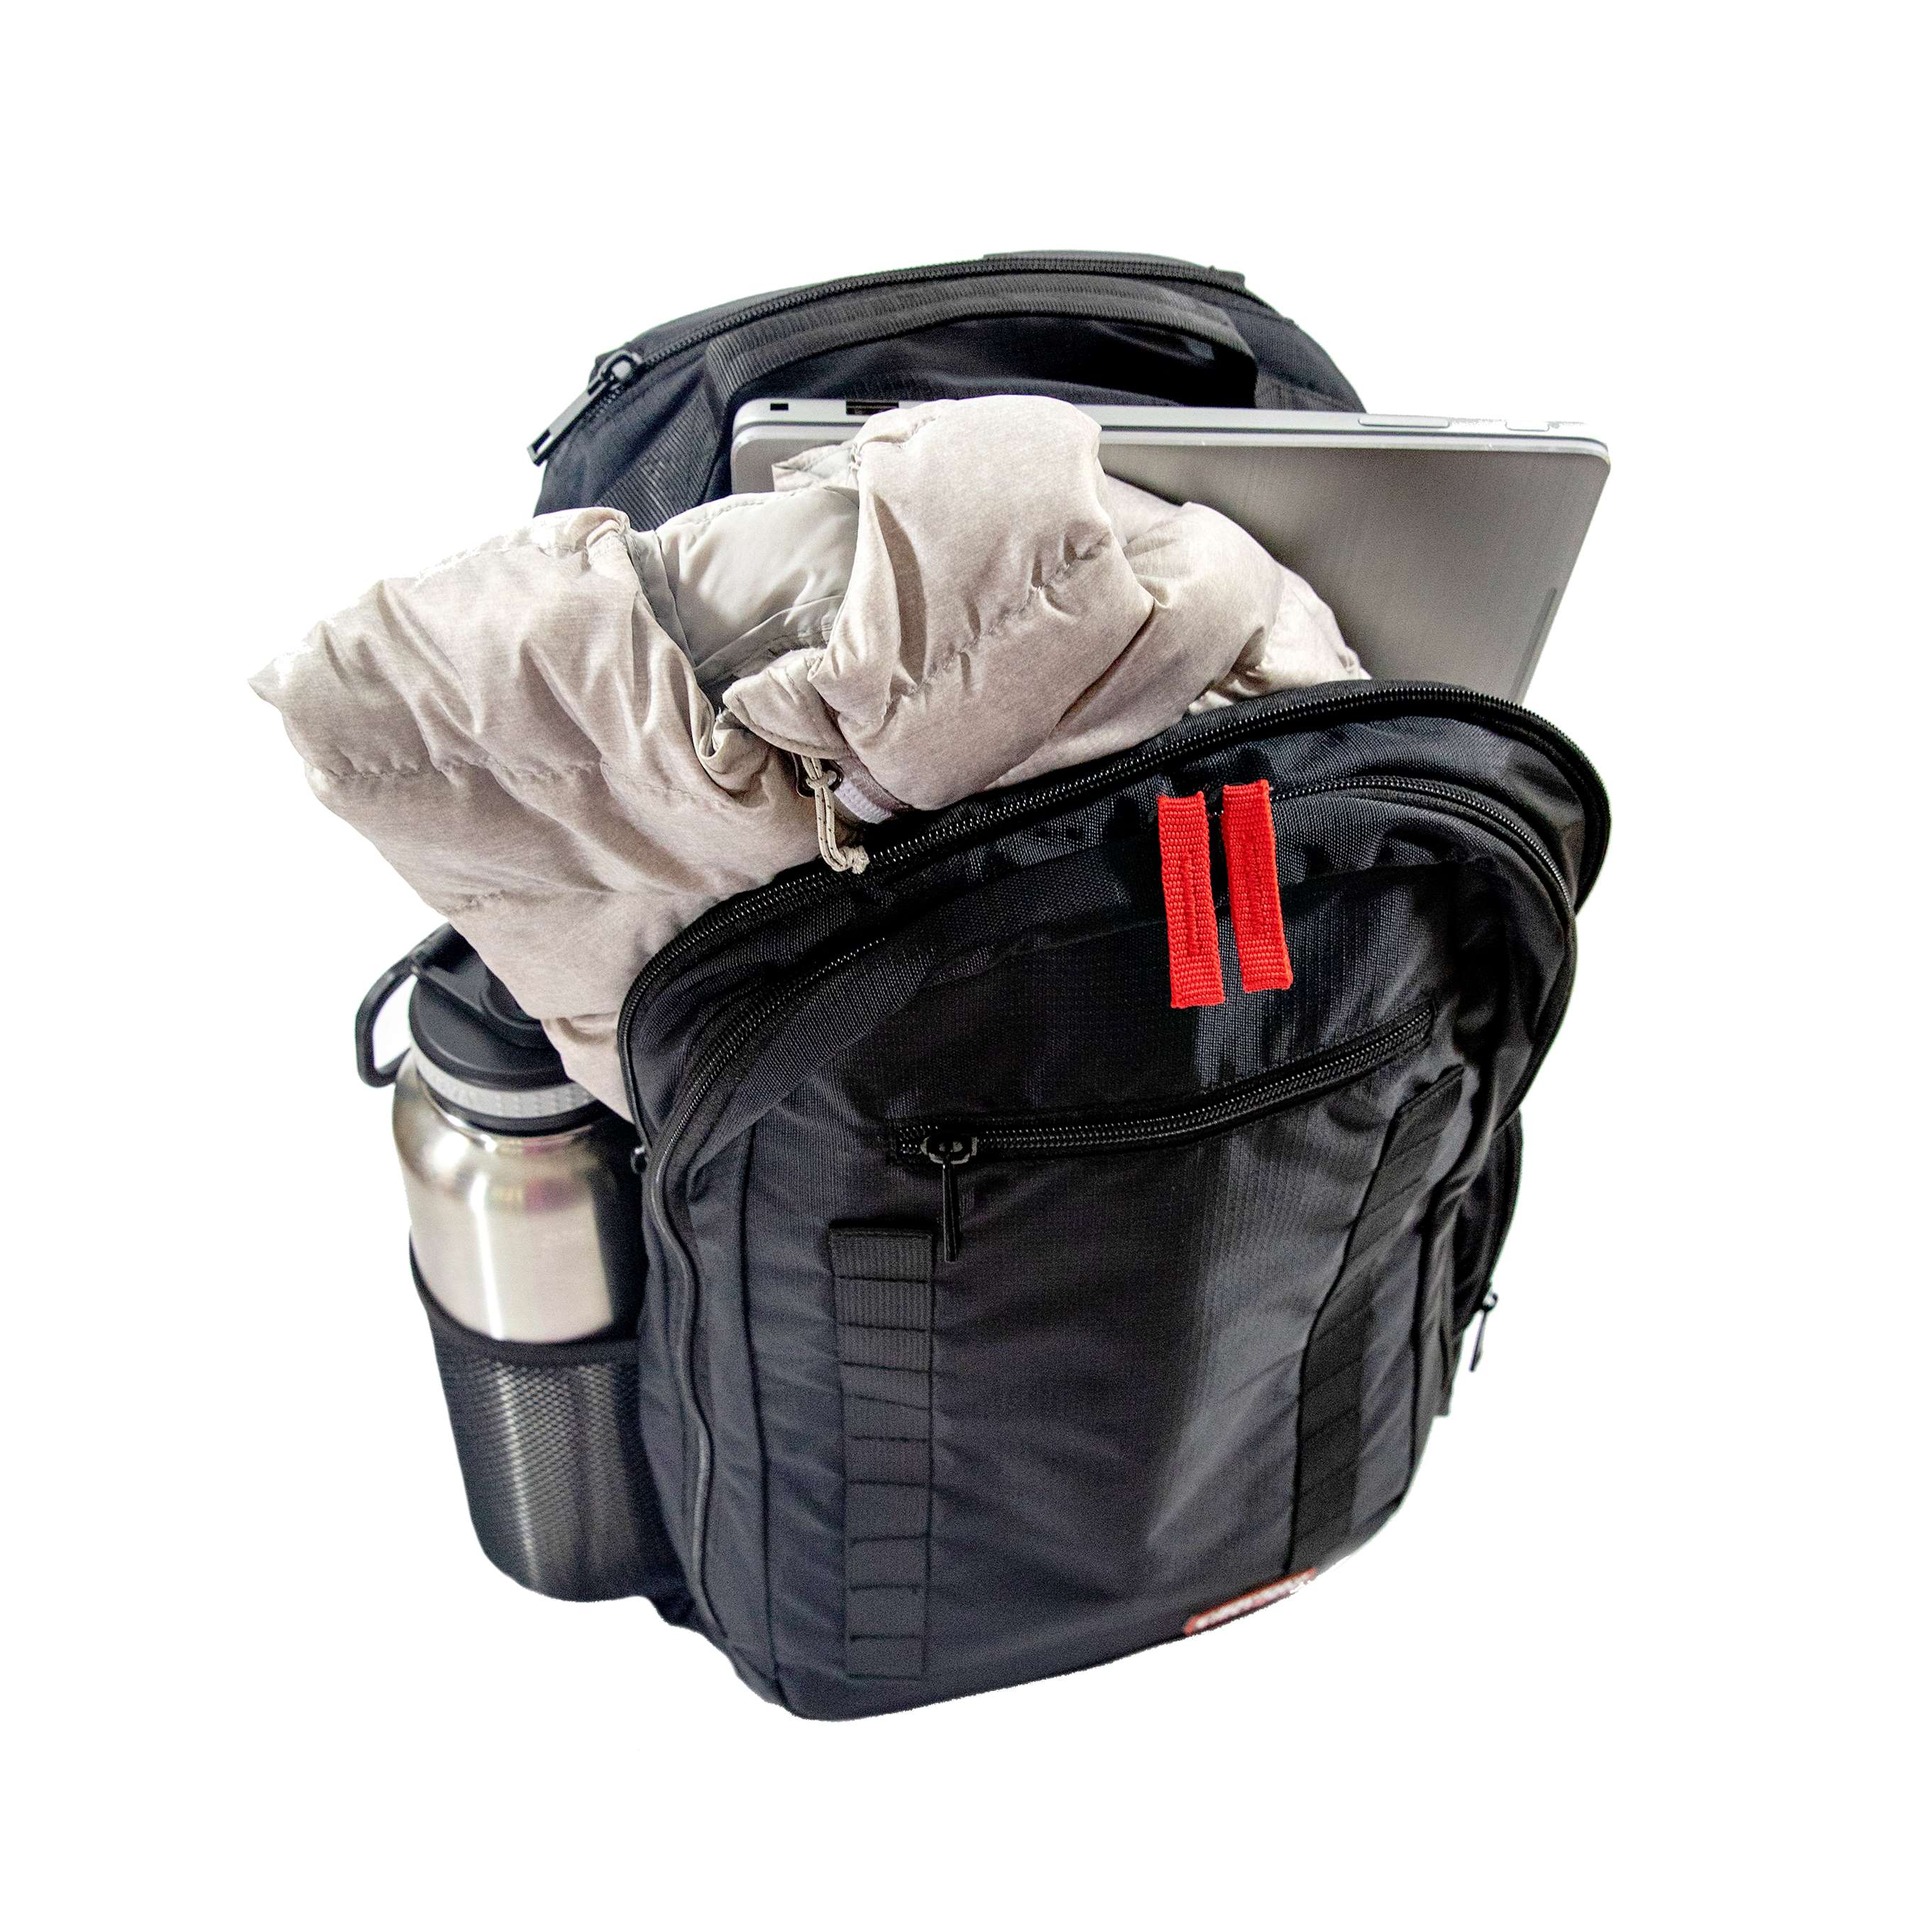 Base first aid kit backpack with white coat and computer